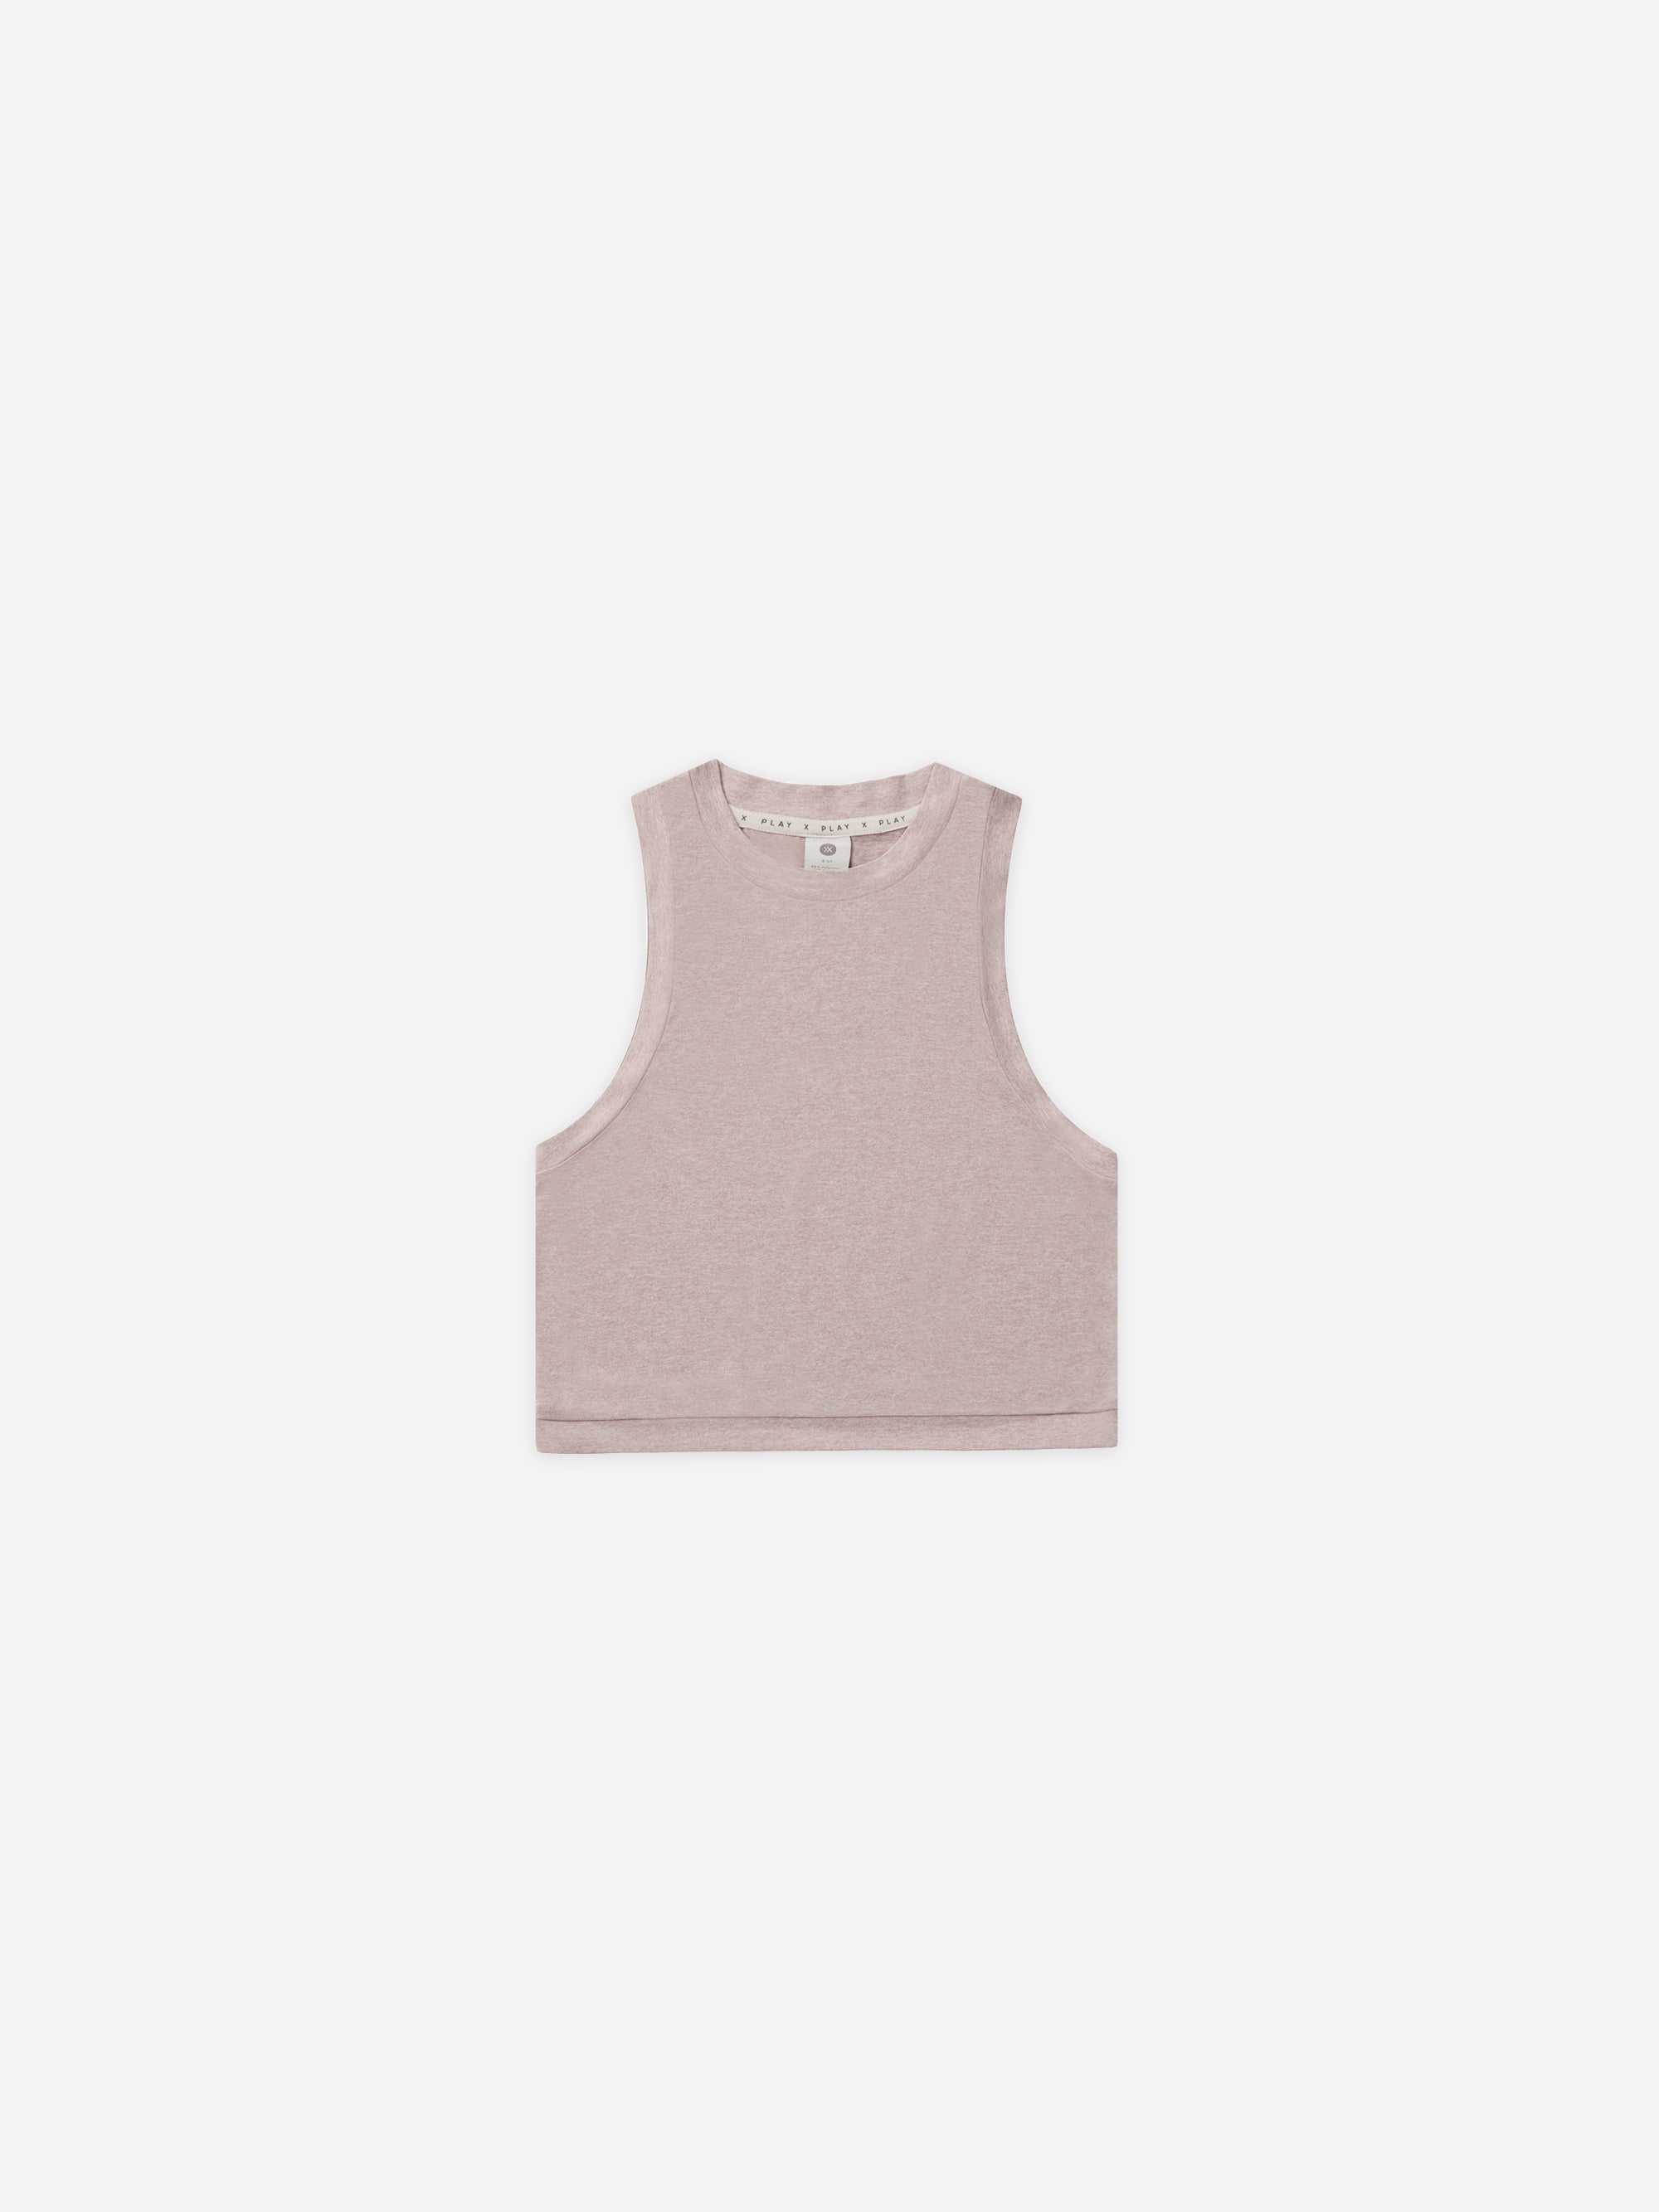 Delta Tank || Heathered Mauve - Rylee + Cru | Kids Clothes | Trendy Baby Clothes | Modern Infant Outfits |